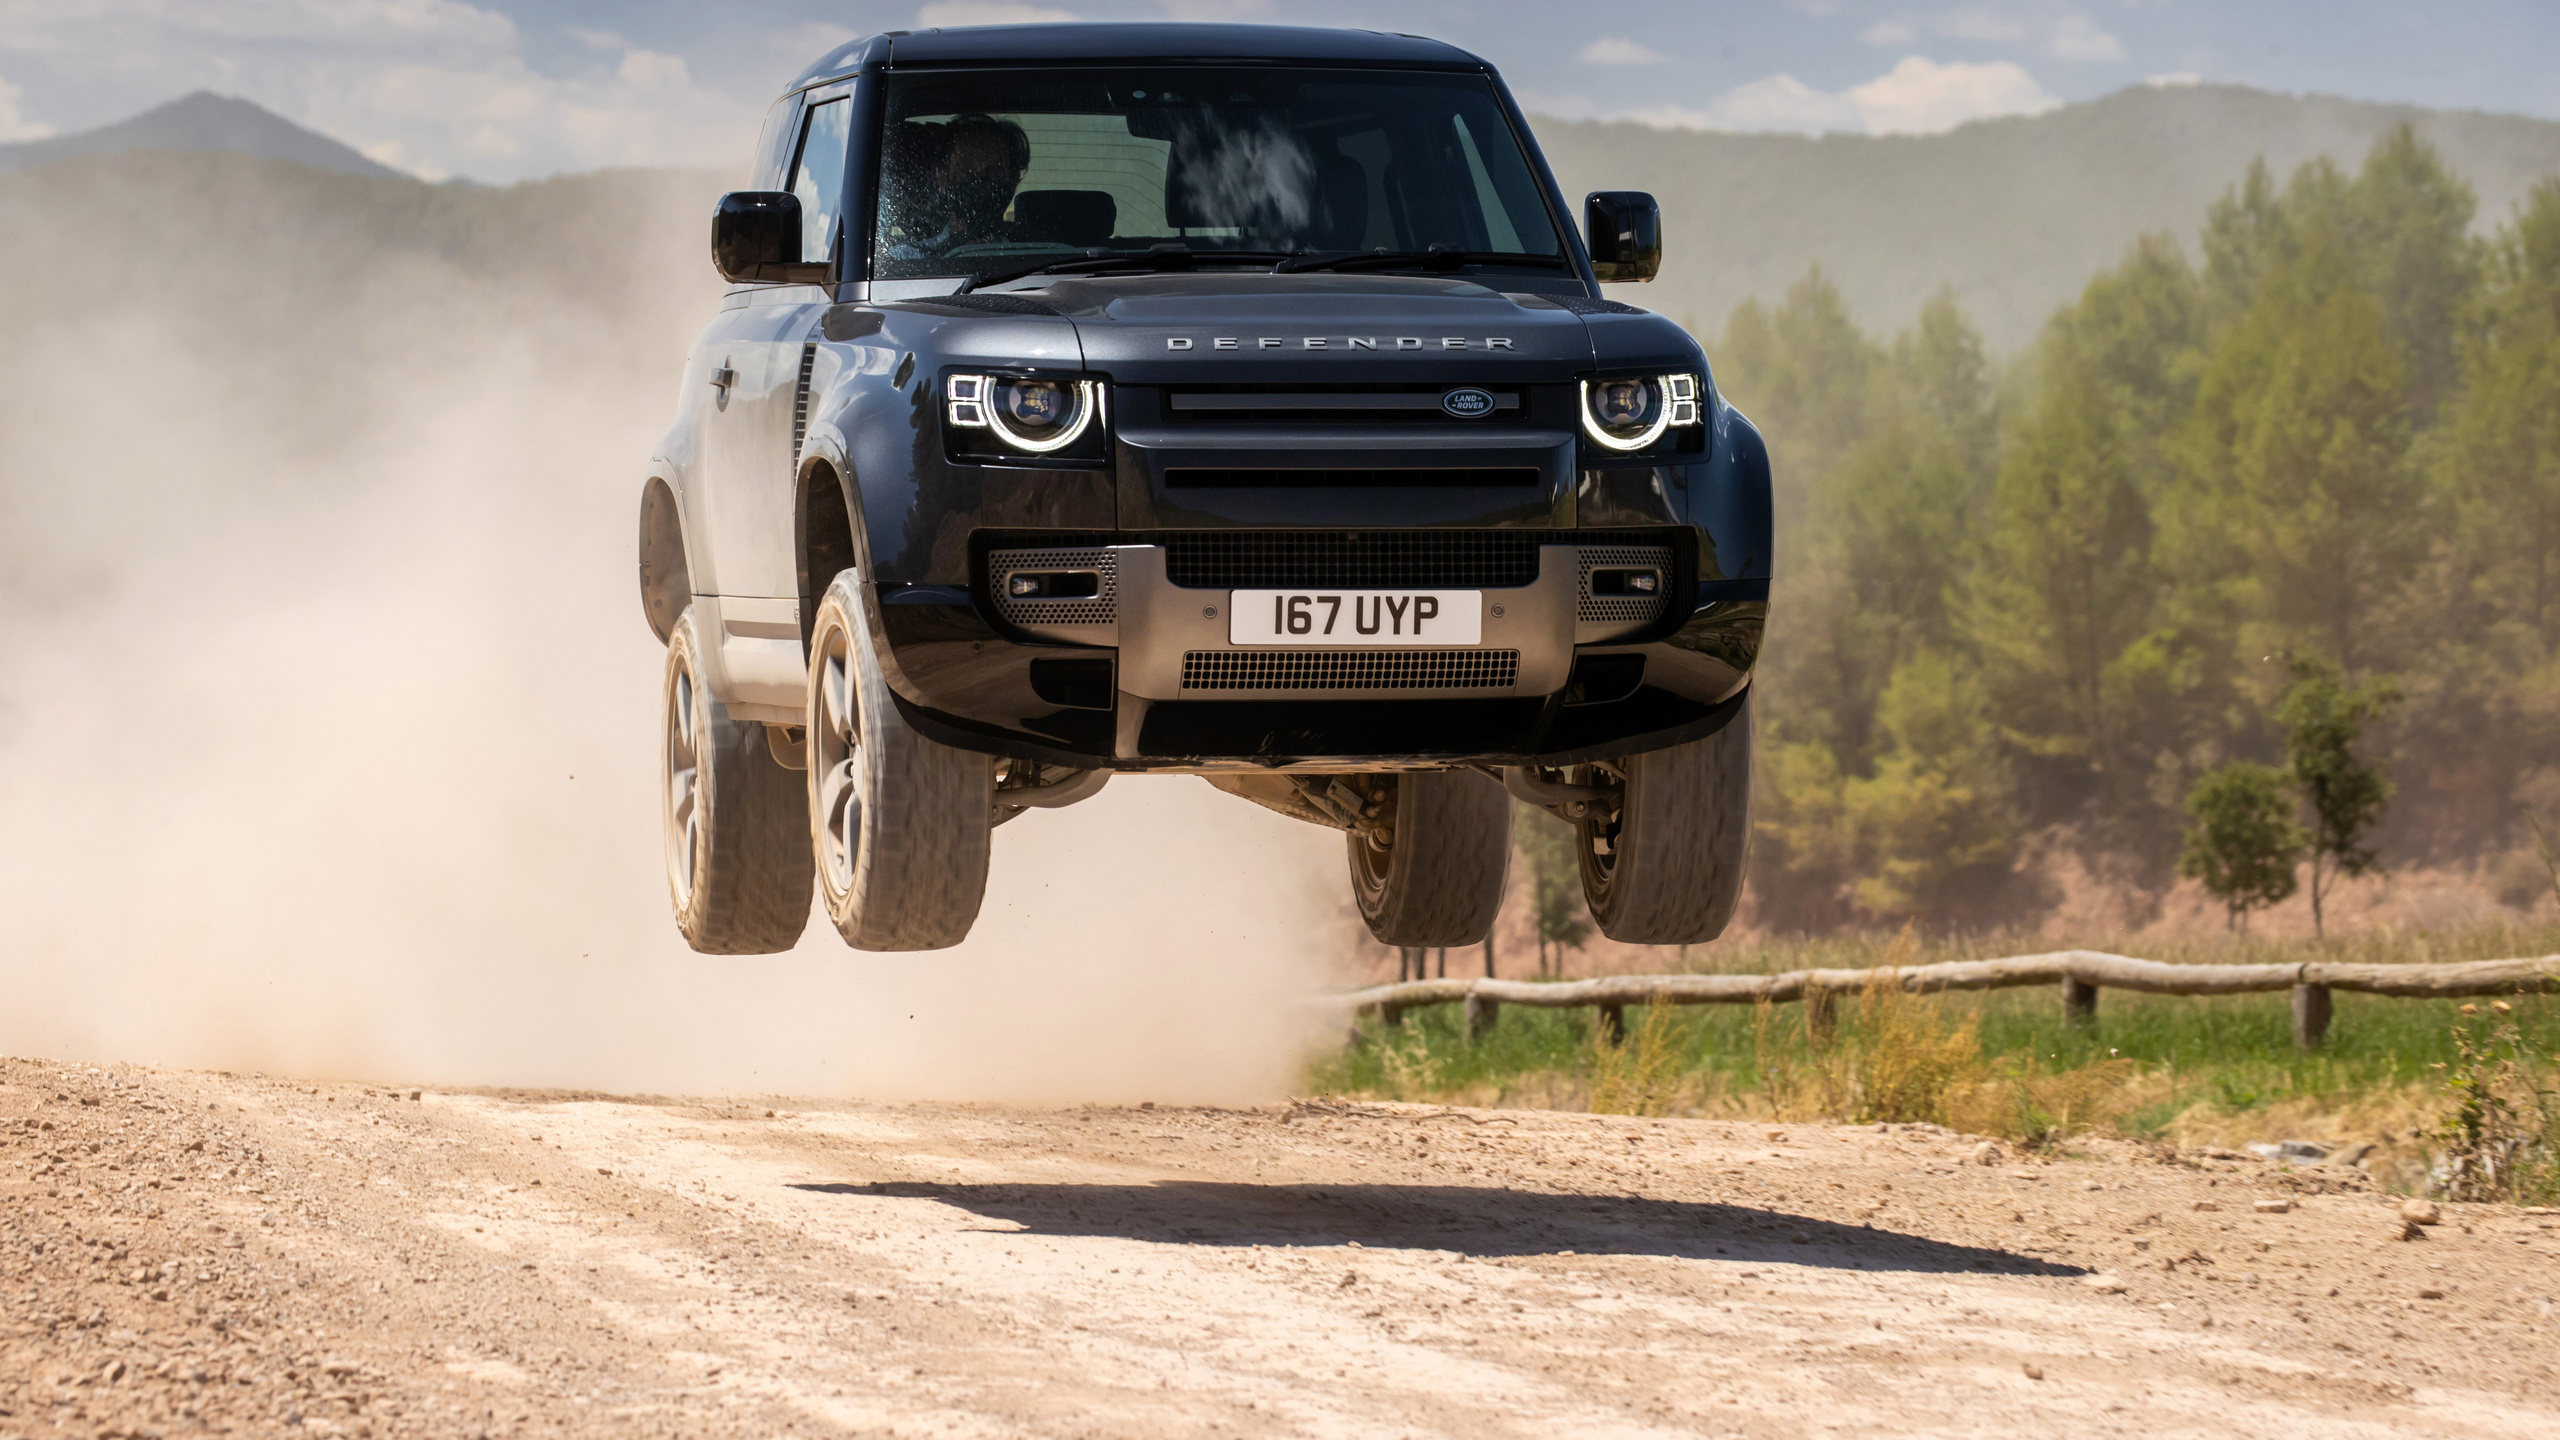 Off-road Driving: Land Rover Defender 90 V8 Carpathian Edition, The award-winning 4x4 family. 2560x1440 HD Background.